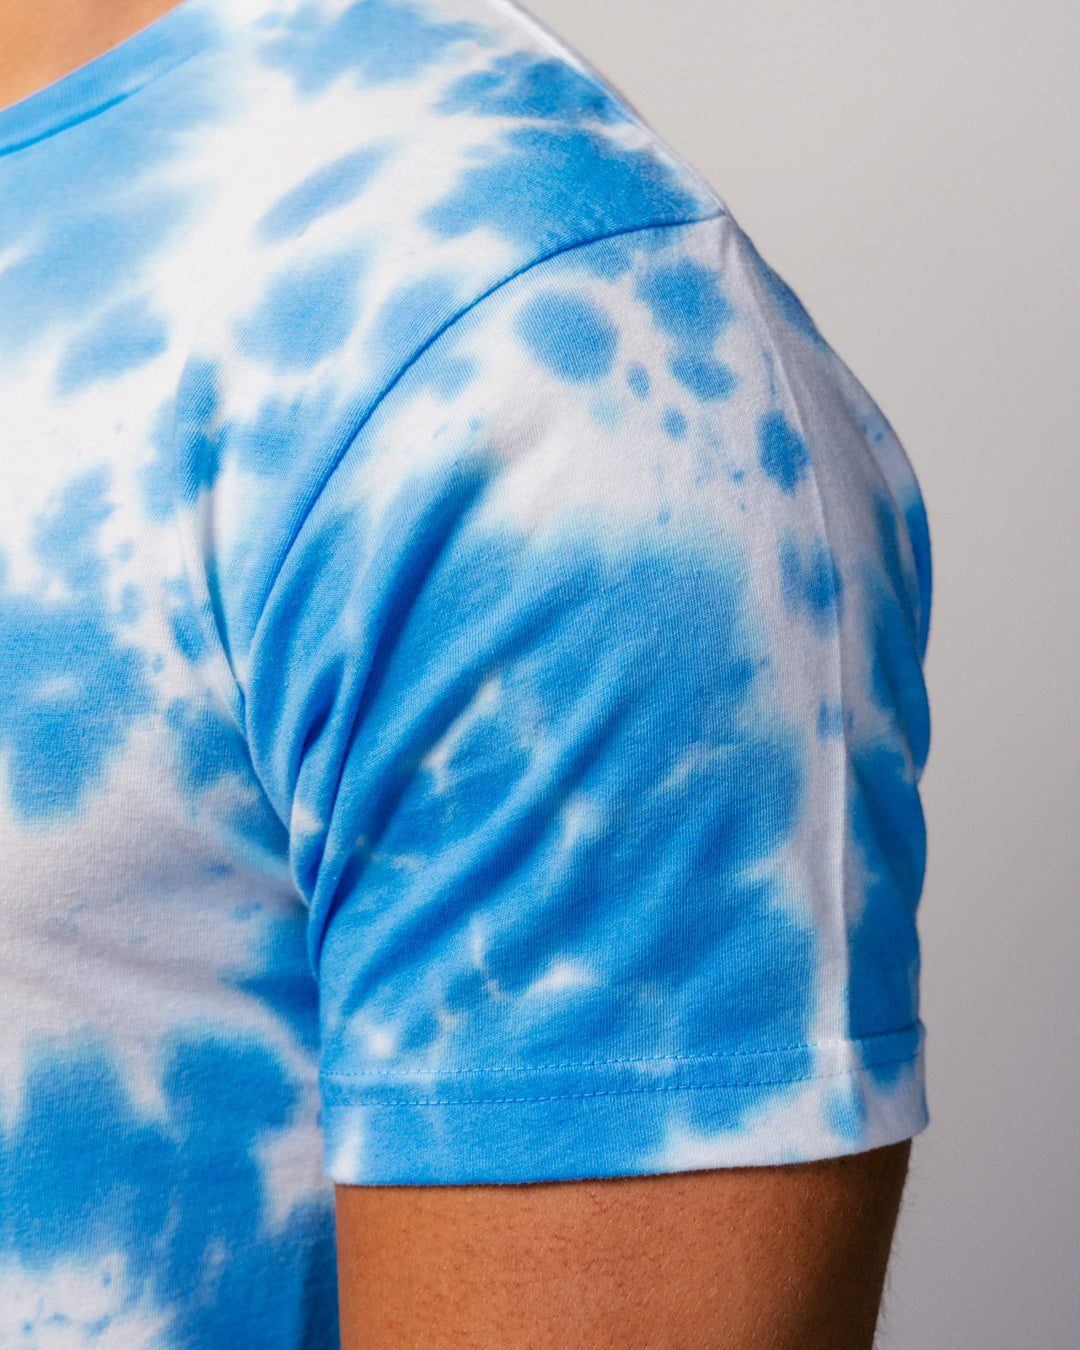 Blue and White Tie Dye Unisex Essential T-Shirt | Charlie Hustle 39 / Xs